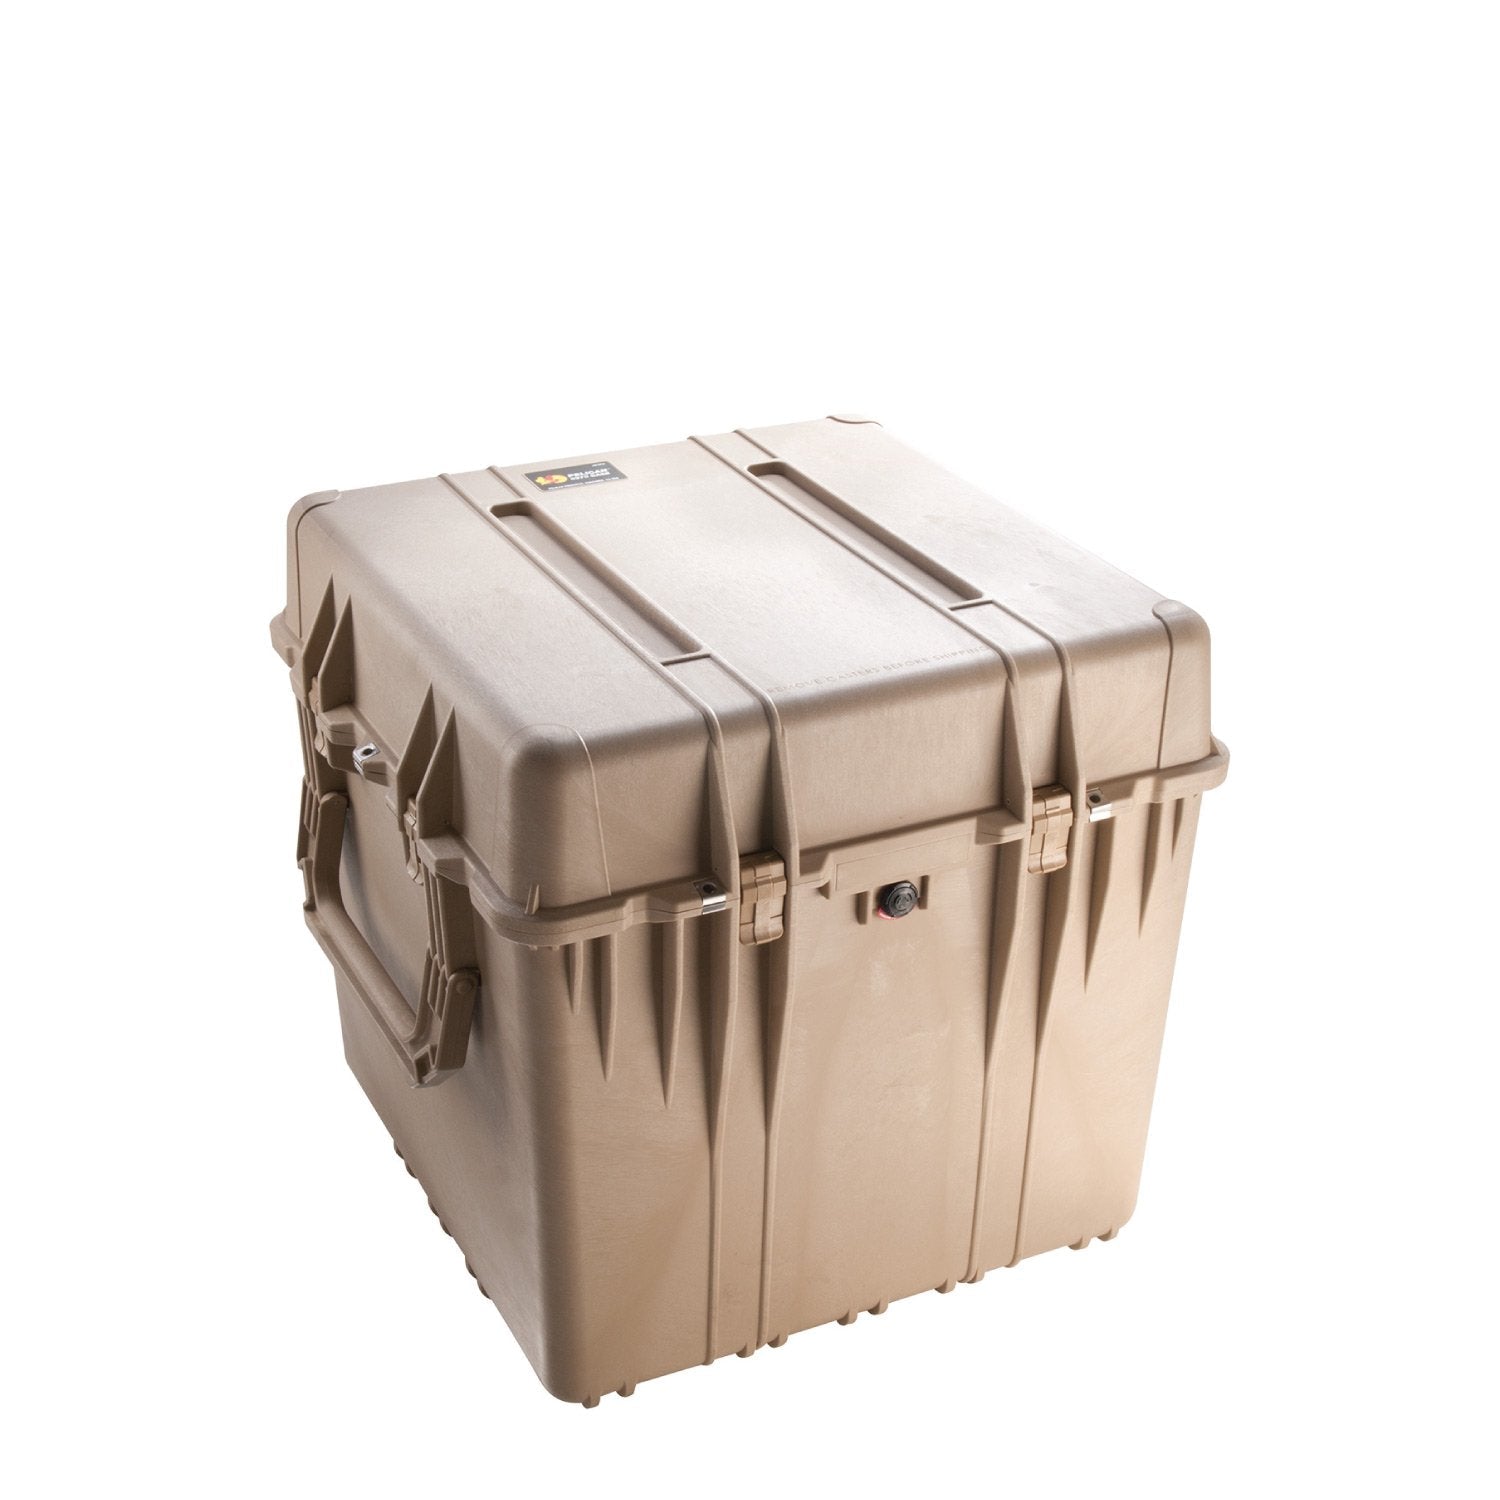 Pelican 0370 Protector Cube Case Desert Tan Bags, Packs and Cases Pelican Products Without Foam Tactical Gear Supplier Tactical Distributors Australia